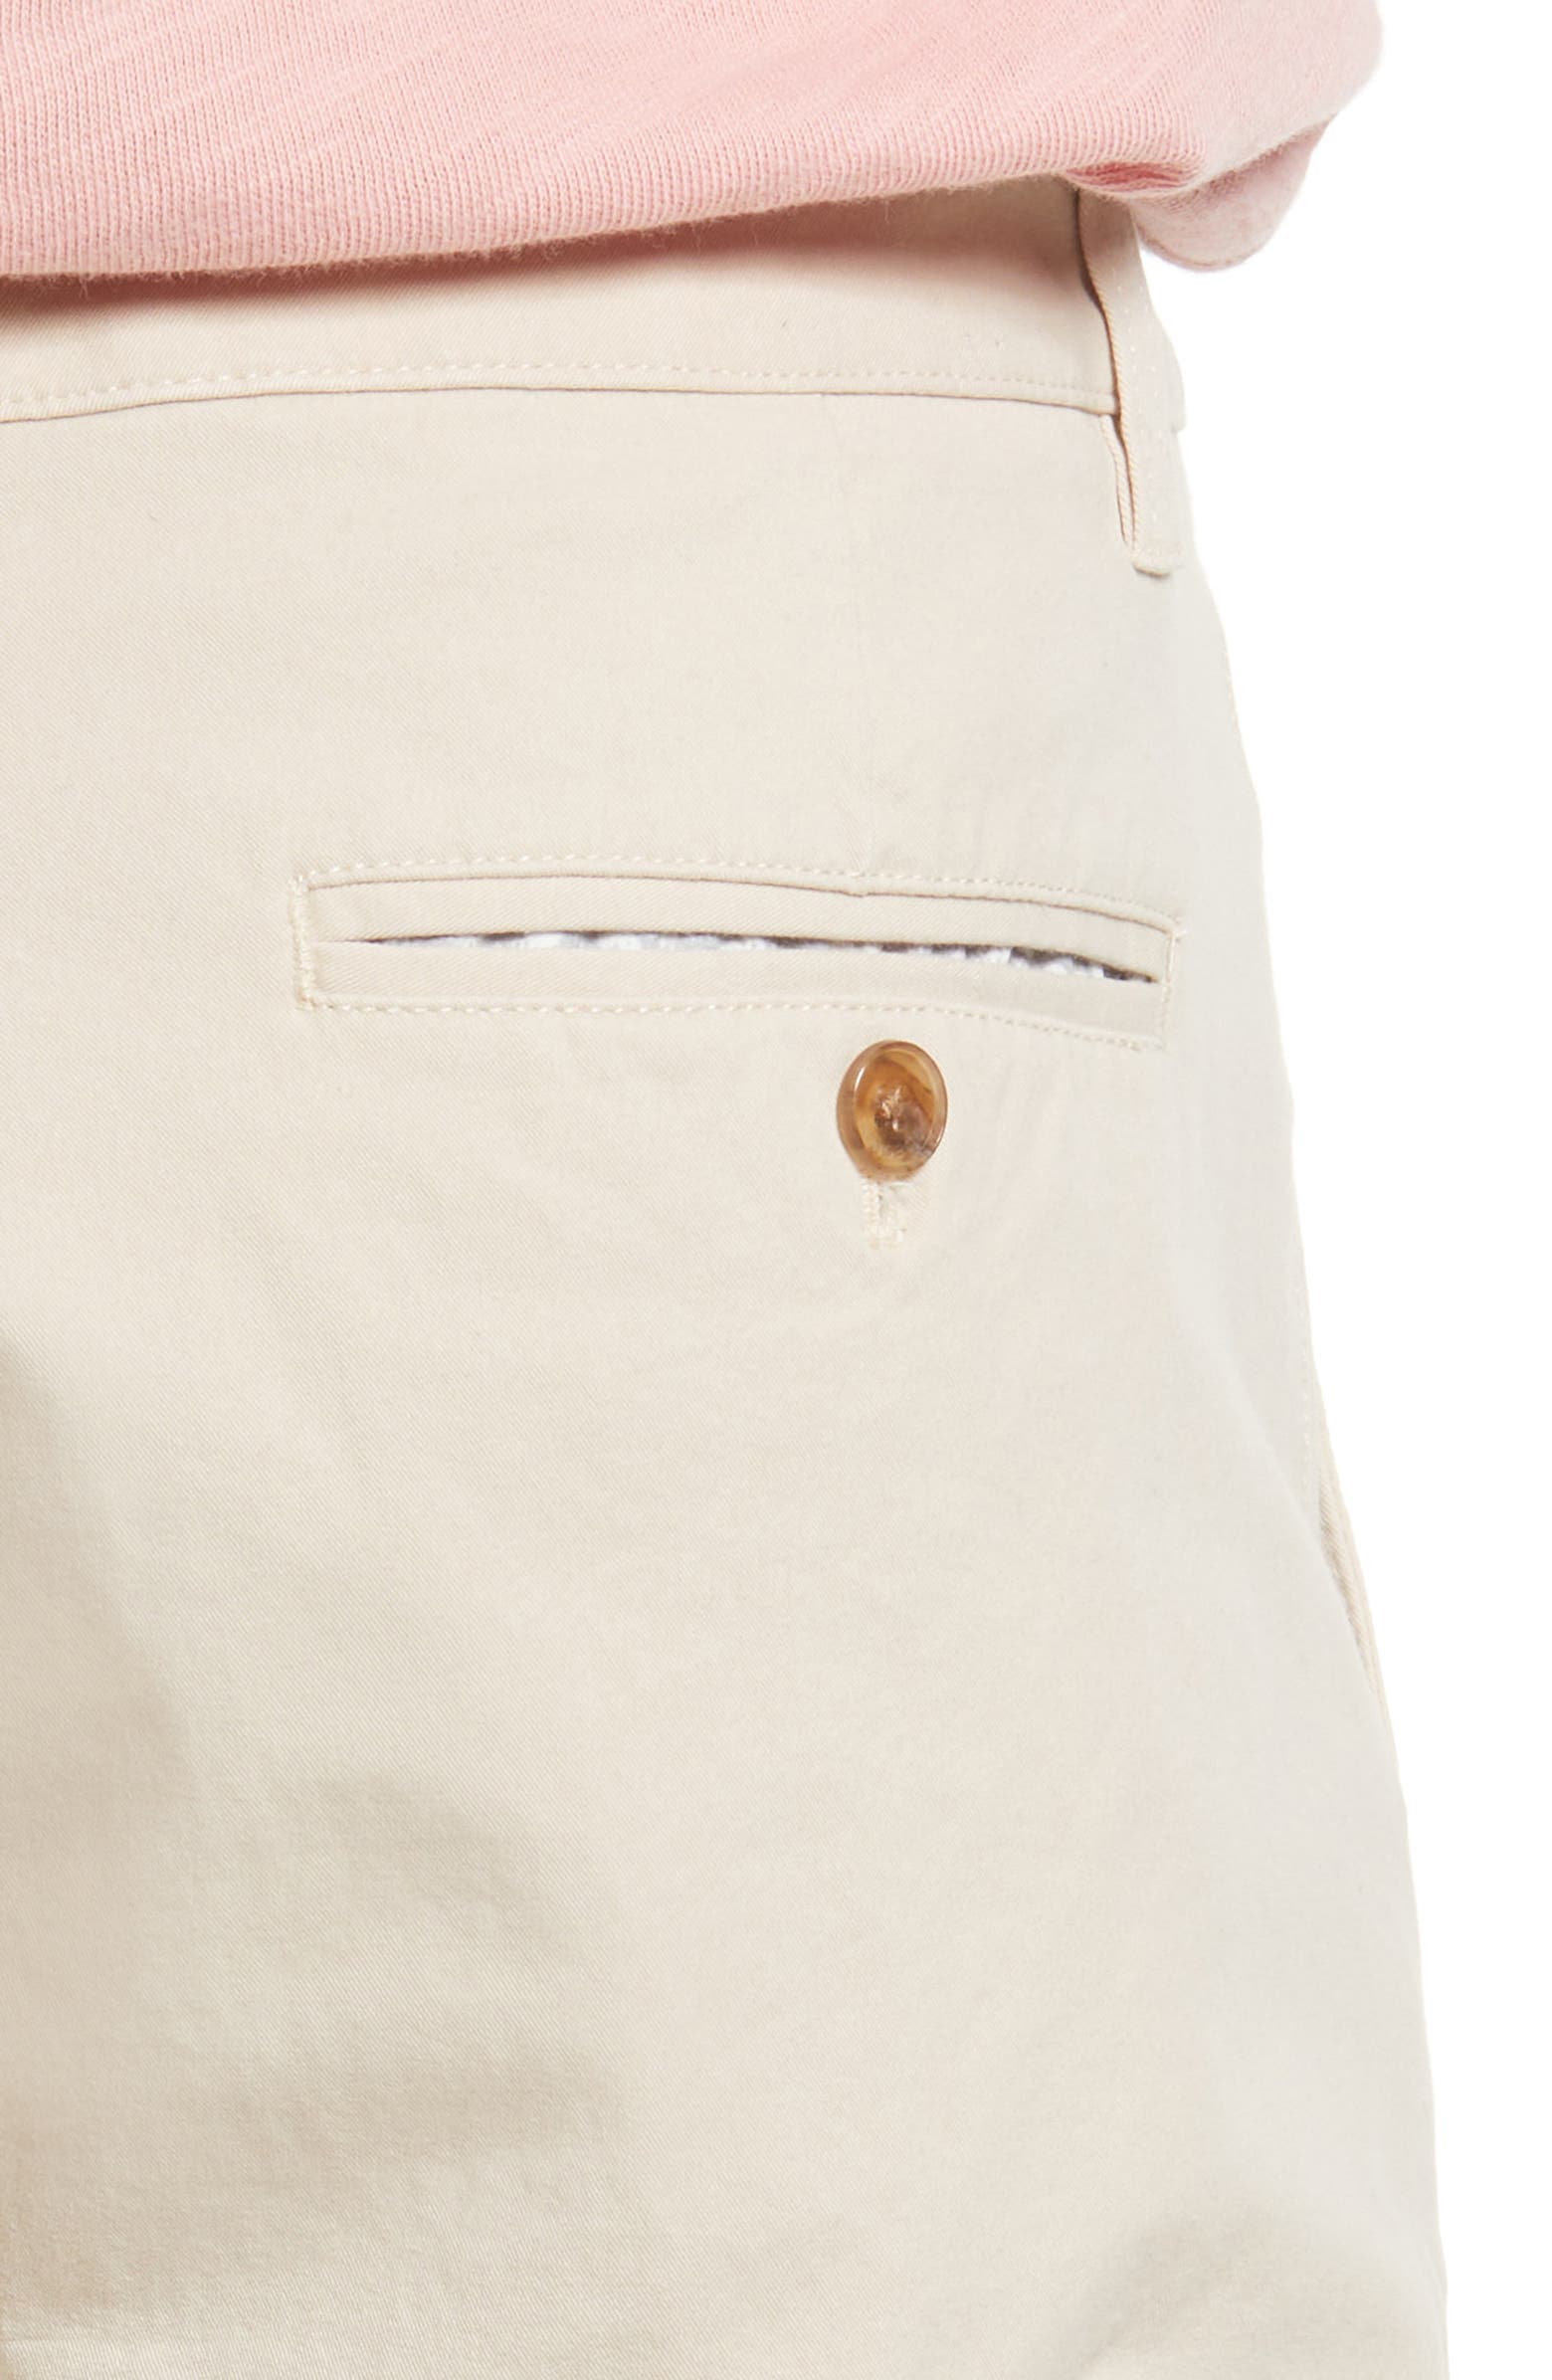 Bonobos Stretch Washed Chino 2.0 Pants | Nordstrom